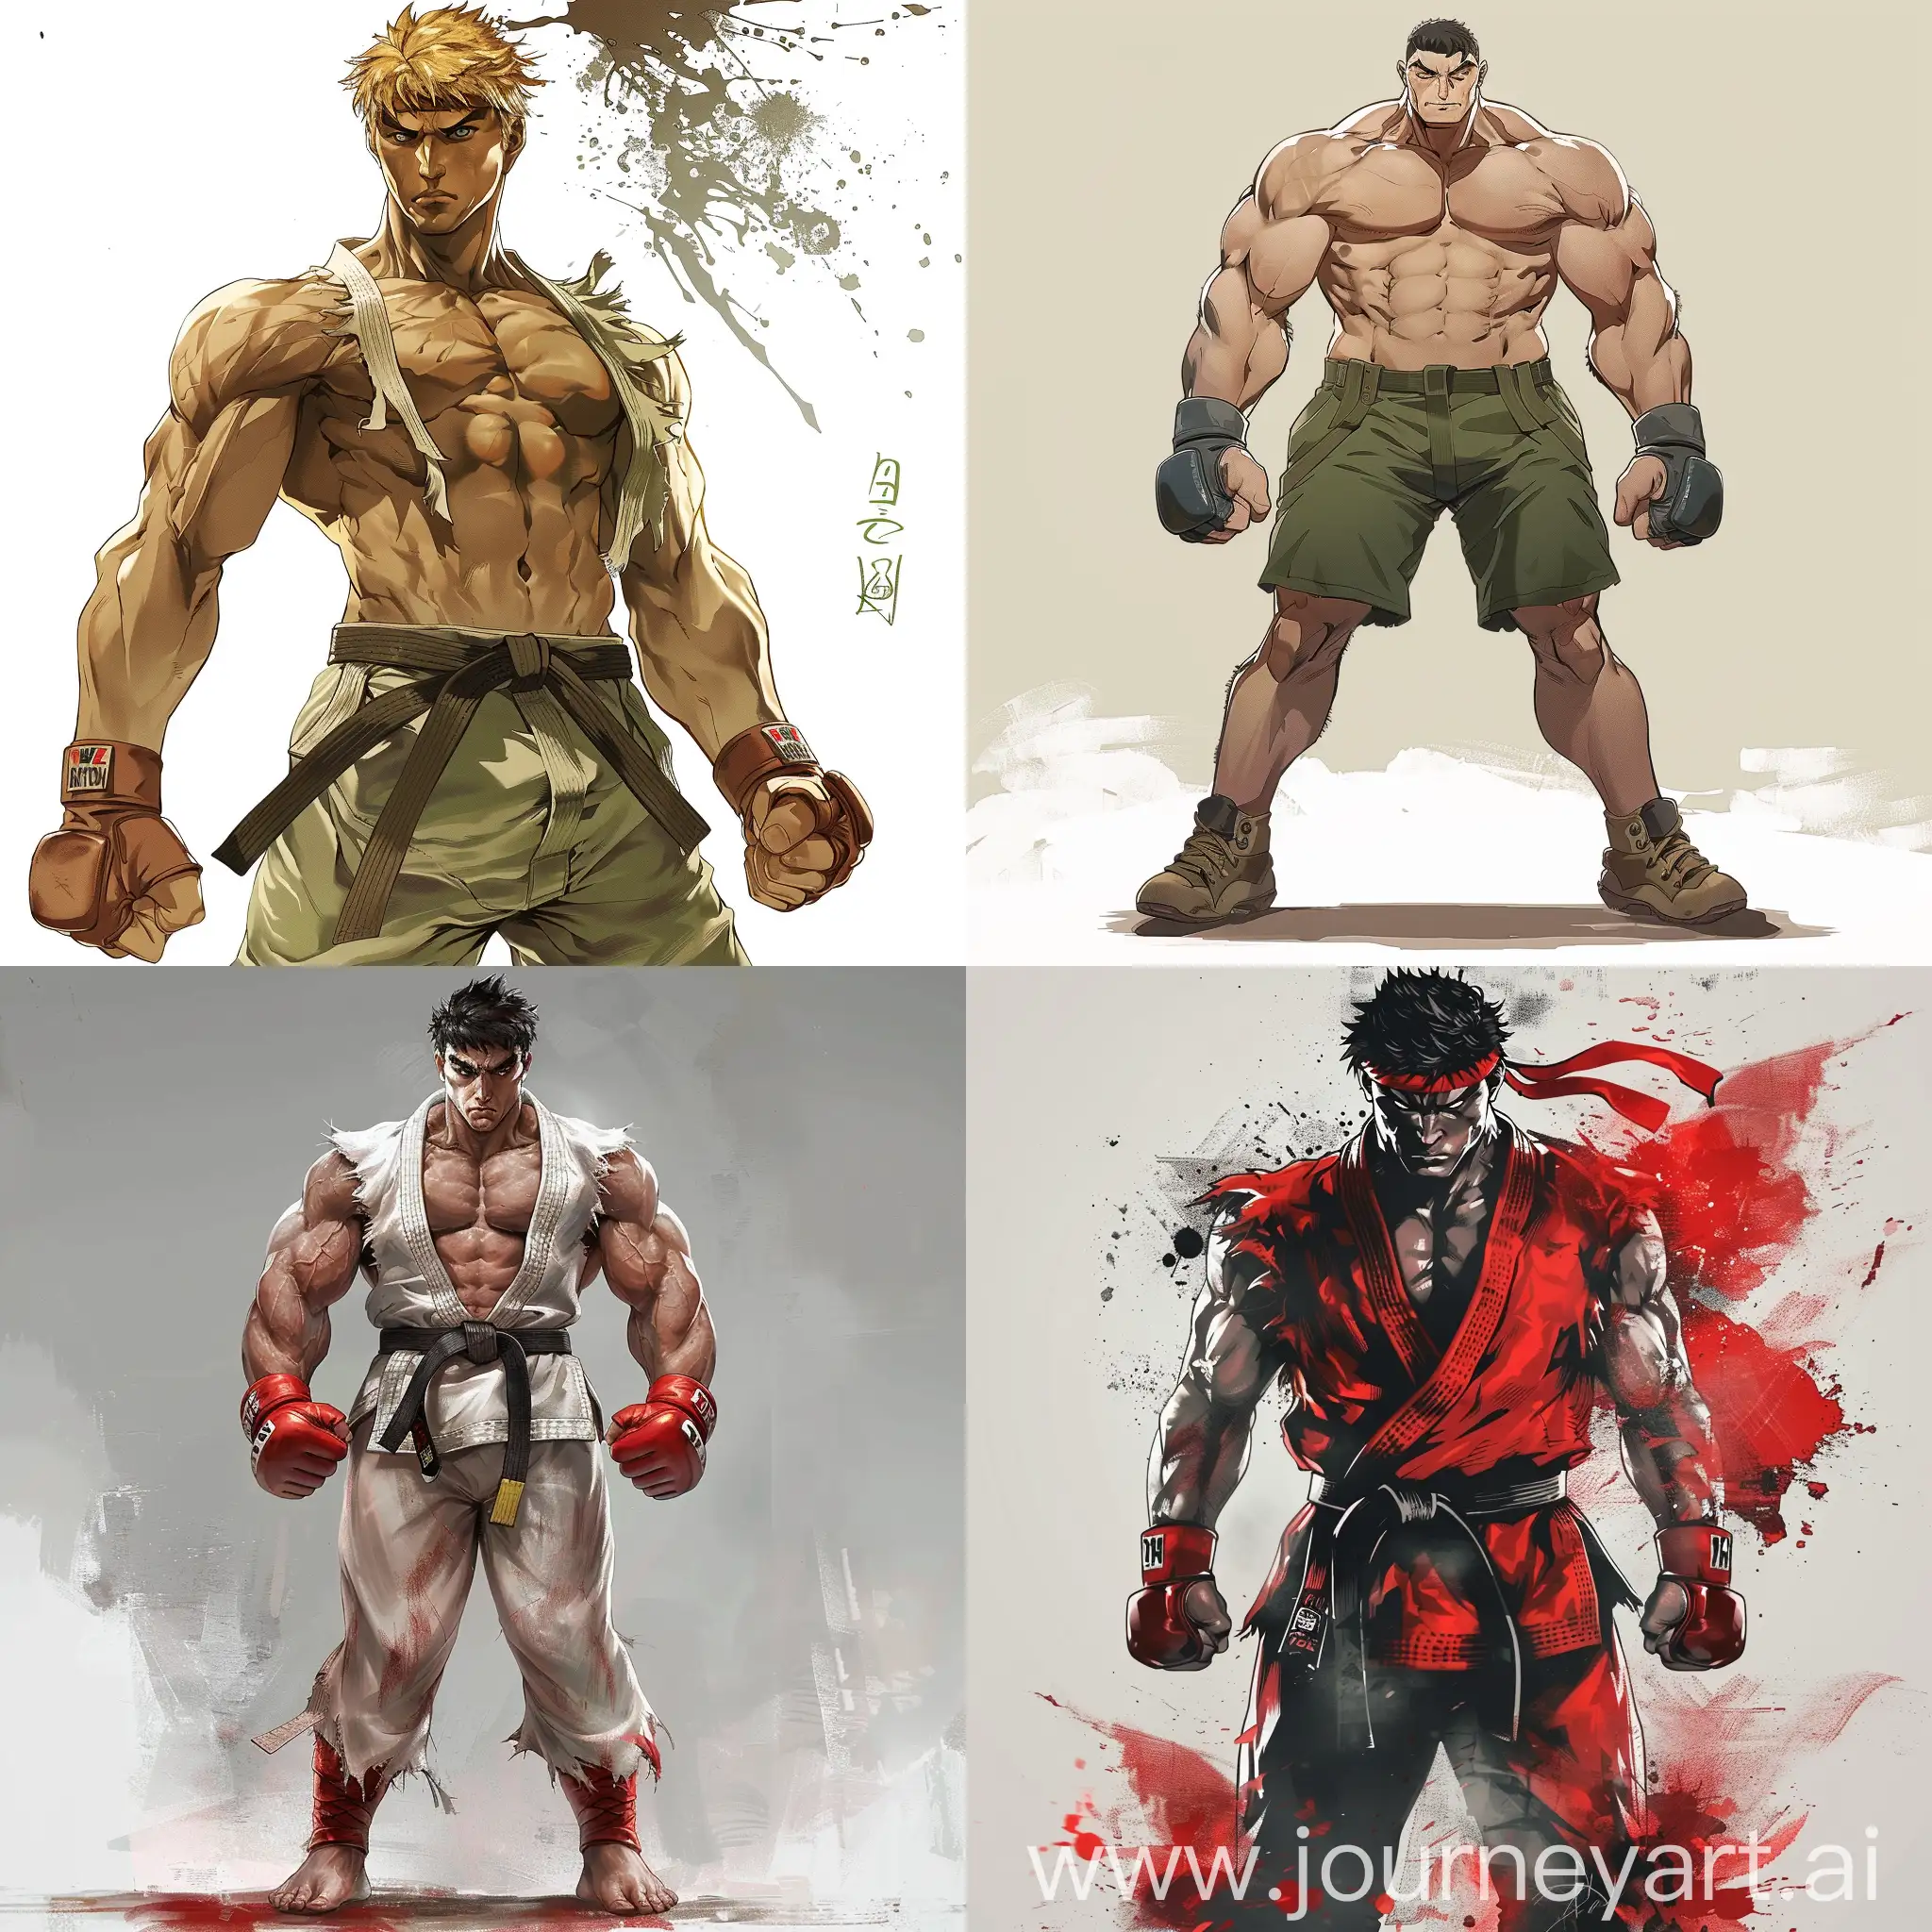 character full body of Fighter Man From Street Fighter, anime art style